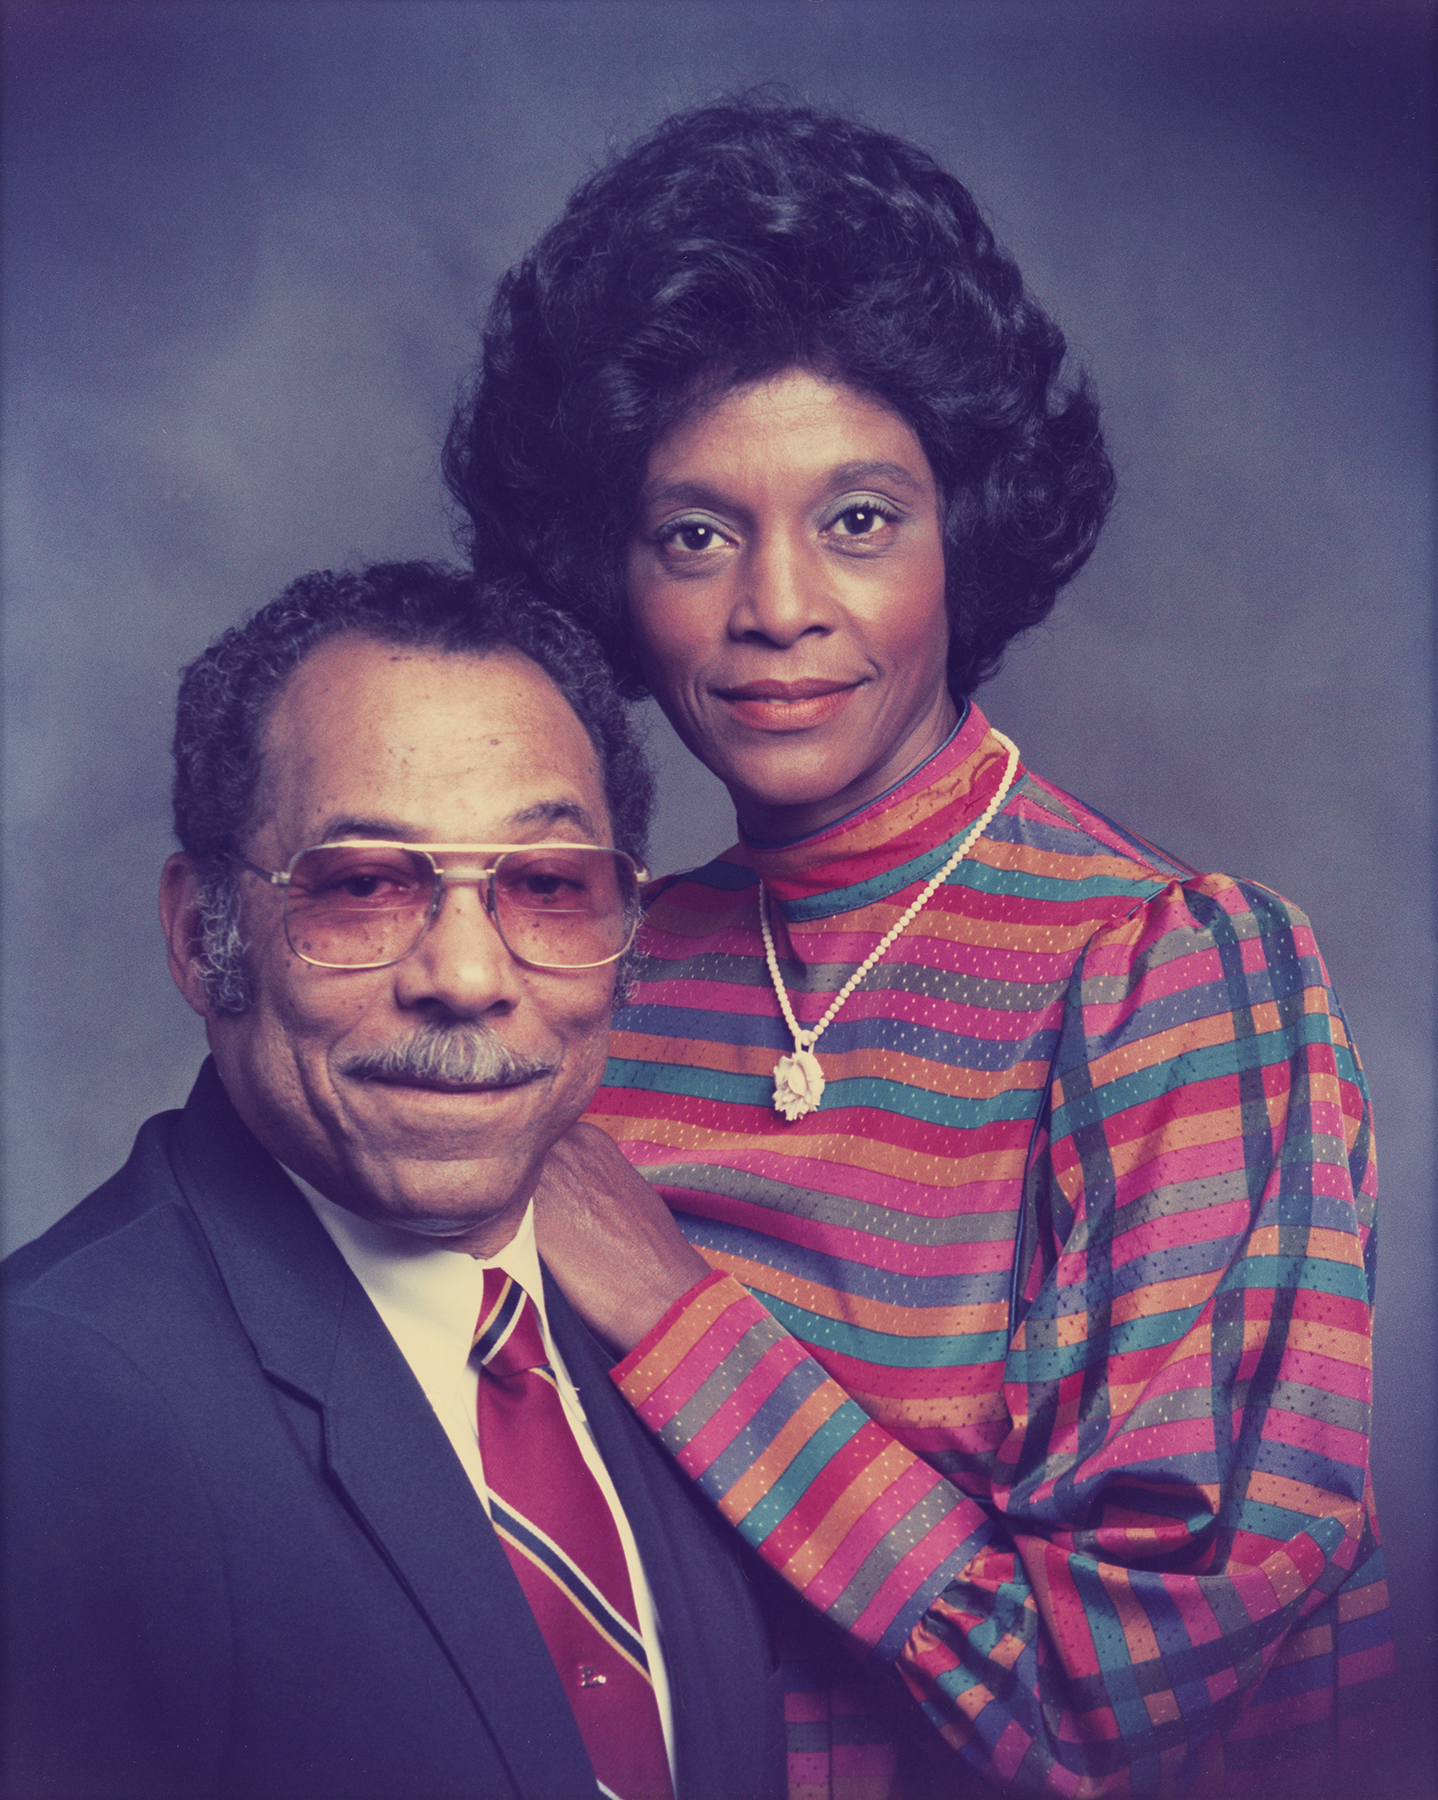 Elzie and Ruby Odom pose against a blue-gray background. Ruby is wearing a brightly patterned top. Elzie has aviator-style glasses.